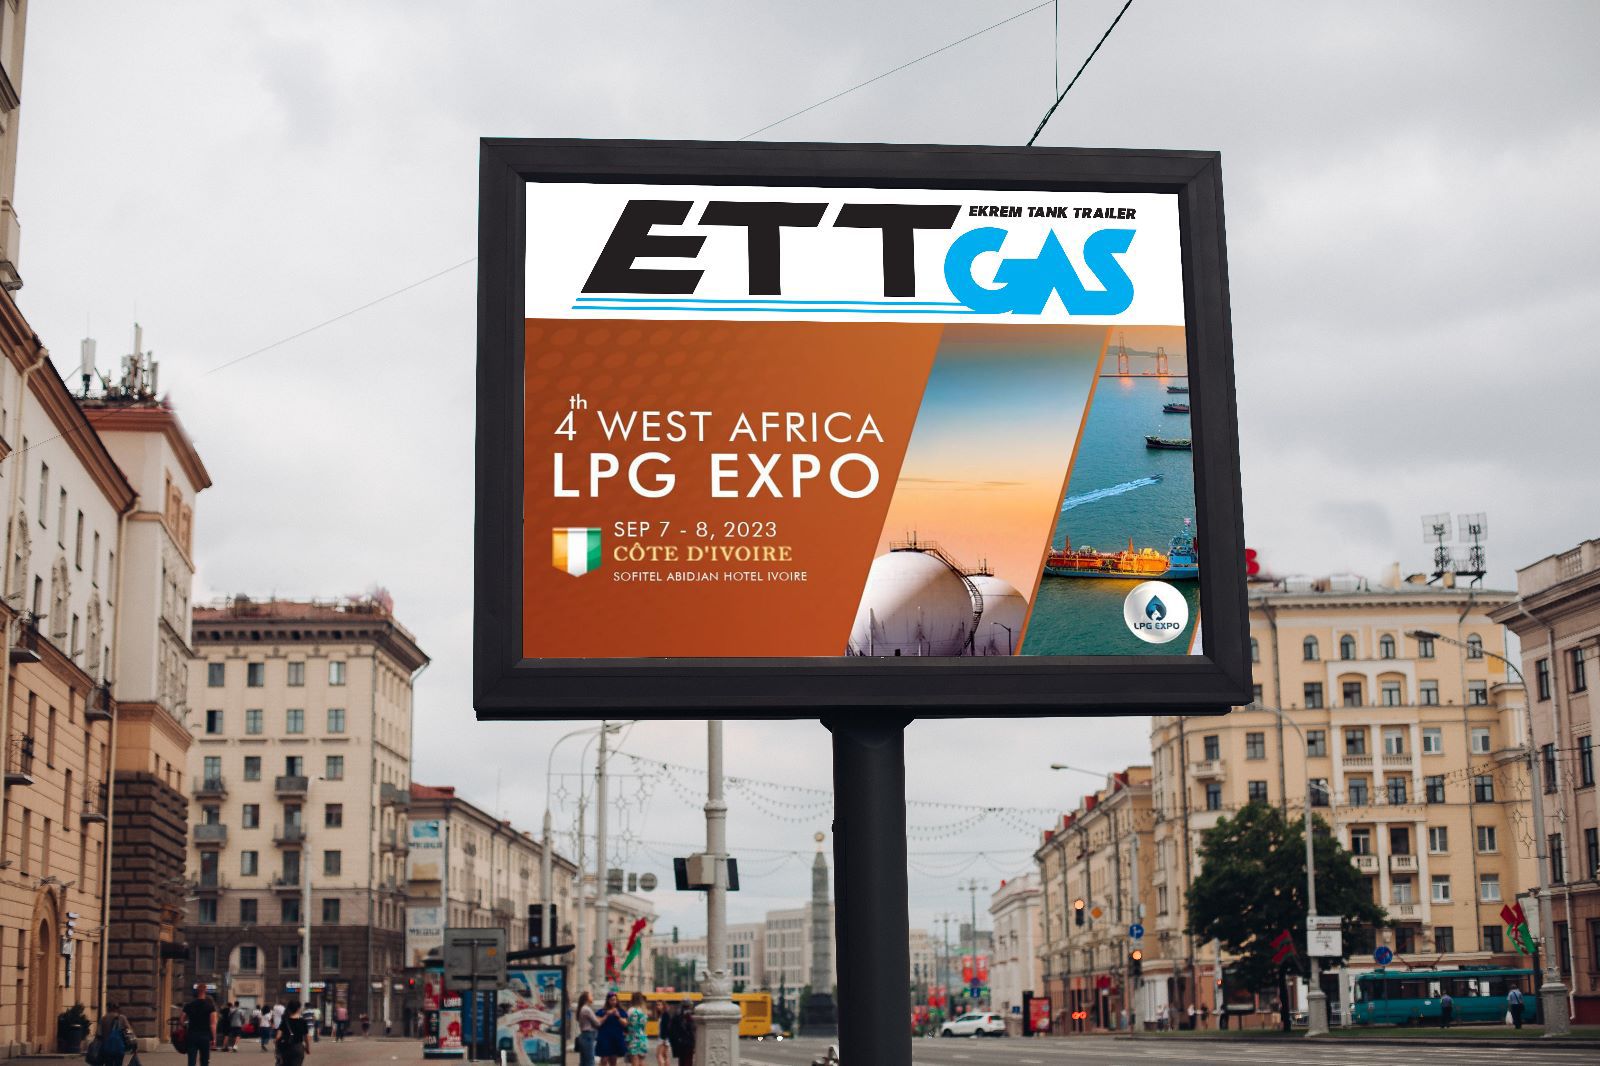 4th West Africa LPG Expo - Cote D'ivoire 7-8 September We are kindly invite you to visit our booth at Ivory Coast ETTGAS LPG Expo exhibition LPG Expo ETTGAS